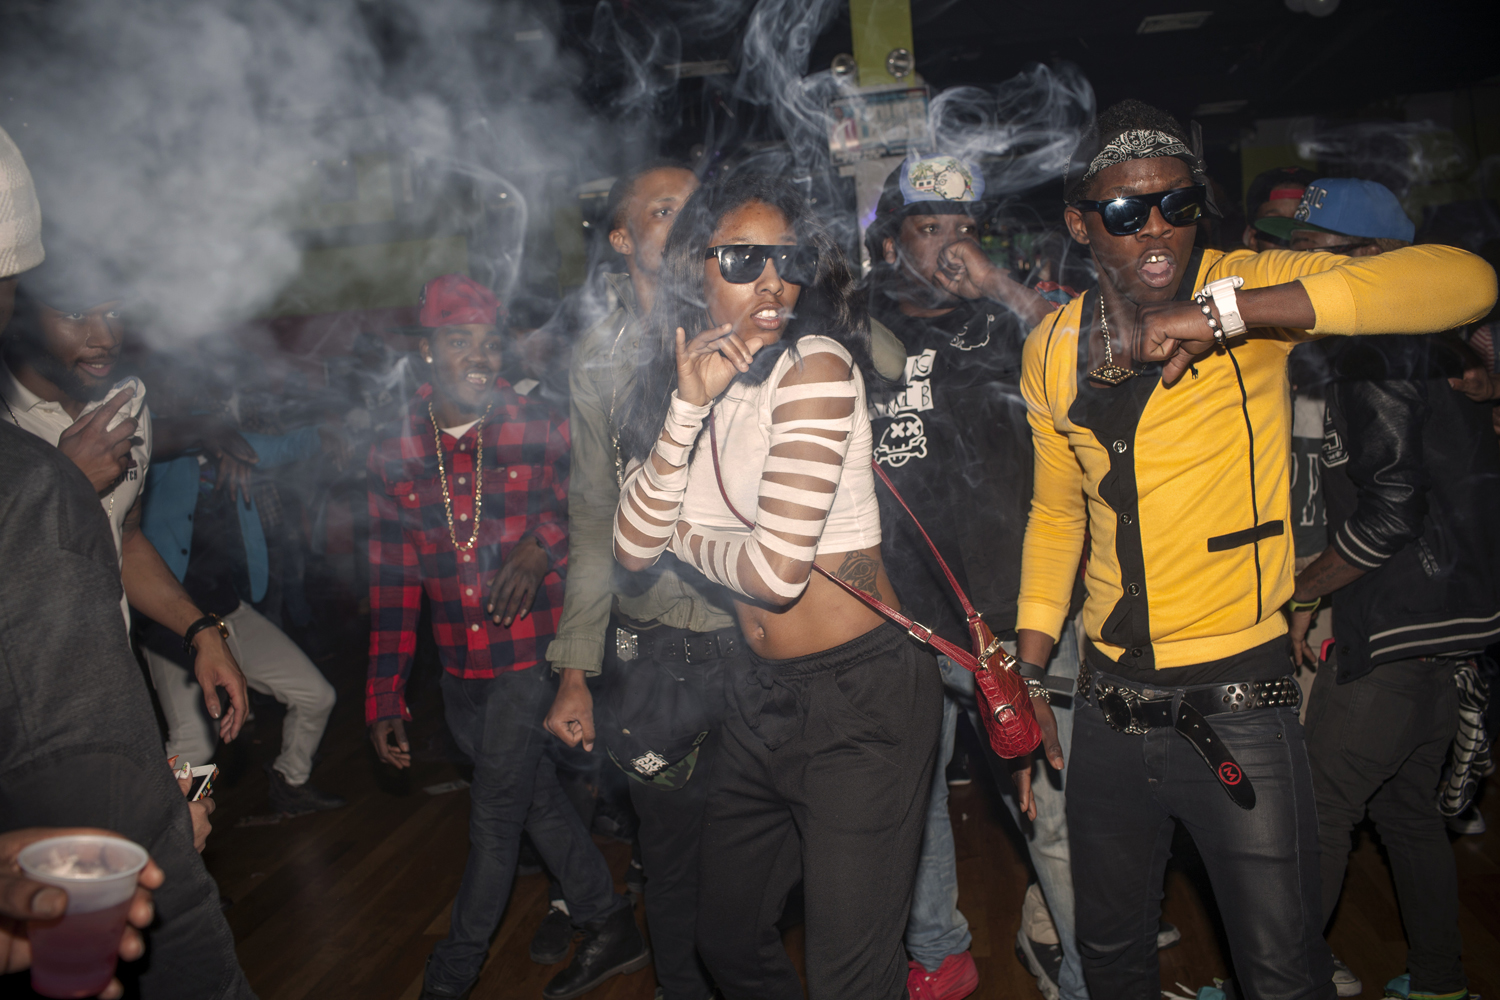 March 22nd, 2013. East Flatbush, Brooklyn. The Flavor Essence dance team moves through its choreography in unison as smoke clouds the air in a nightclub around 3am on a Thursday night. Videographers often attend the parties to make video of the dancers, which will be published on the internet on various websites that cater to the subculture. Teams often compete fiercely for the videographer's spotlight. (Natalie Keyssar)